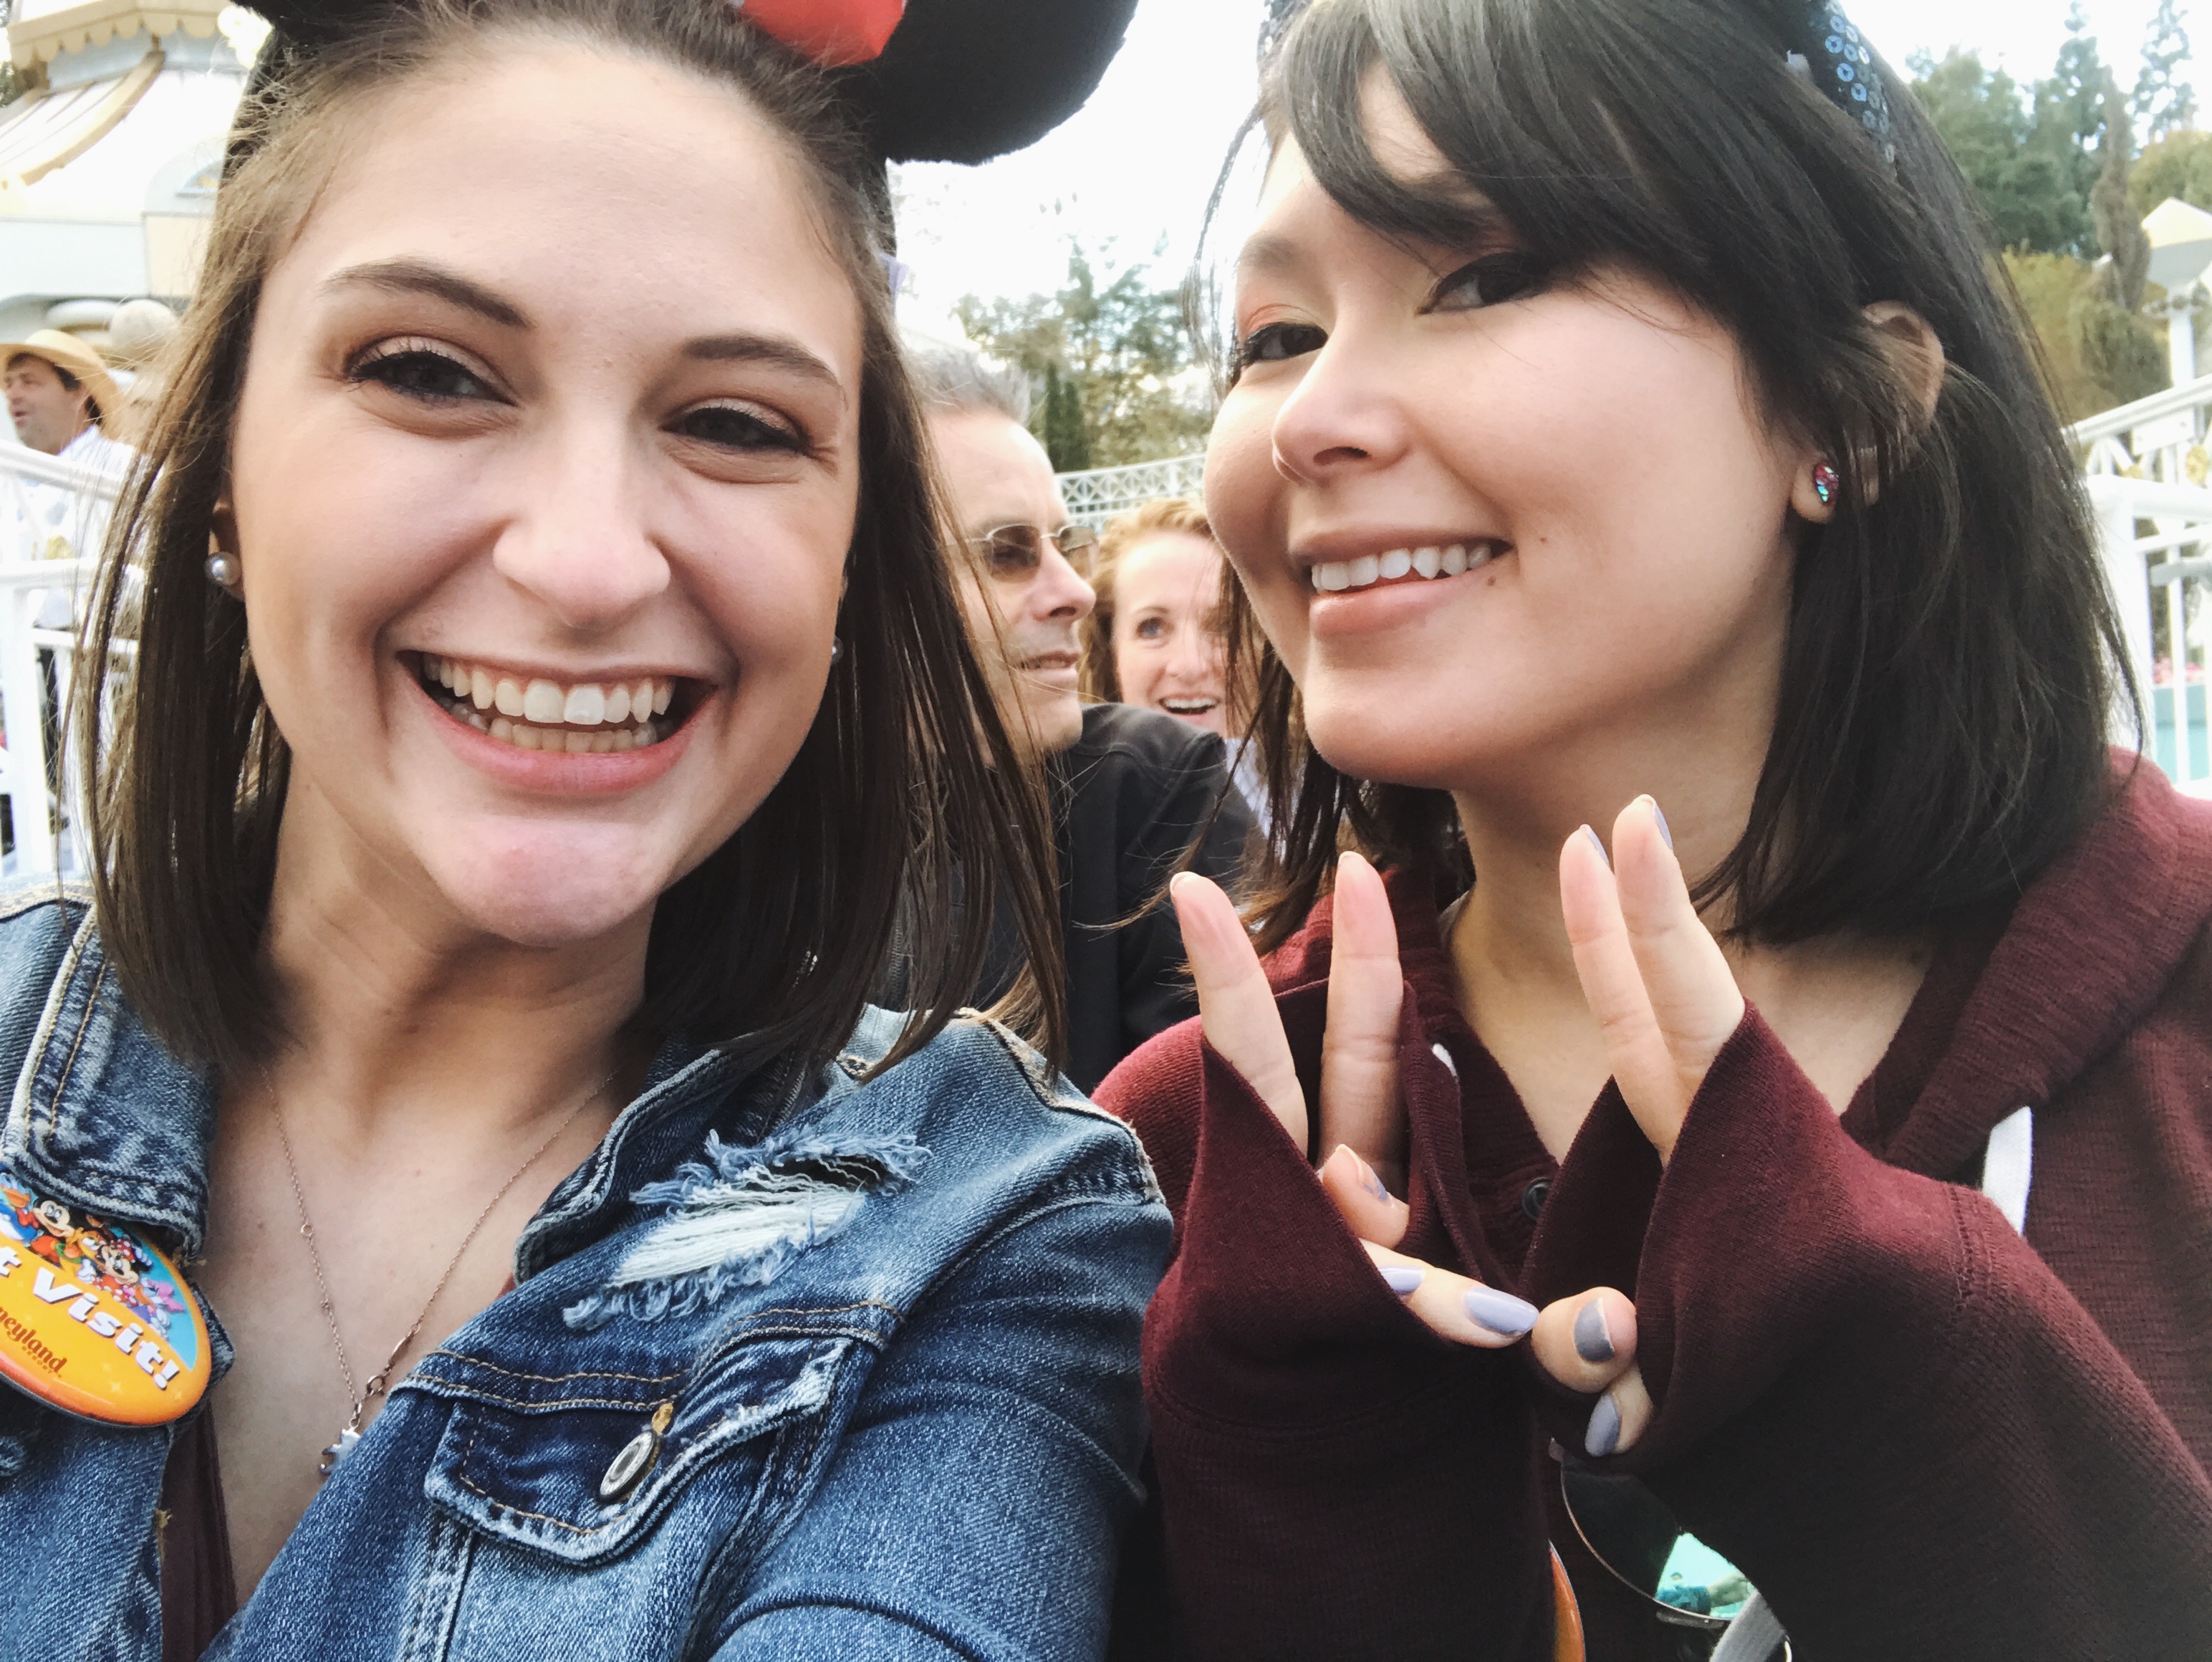 We're Going to Disneyland! - A Spoonful of Honi